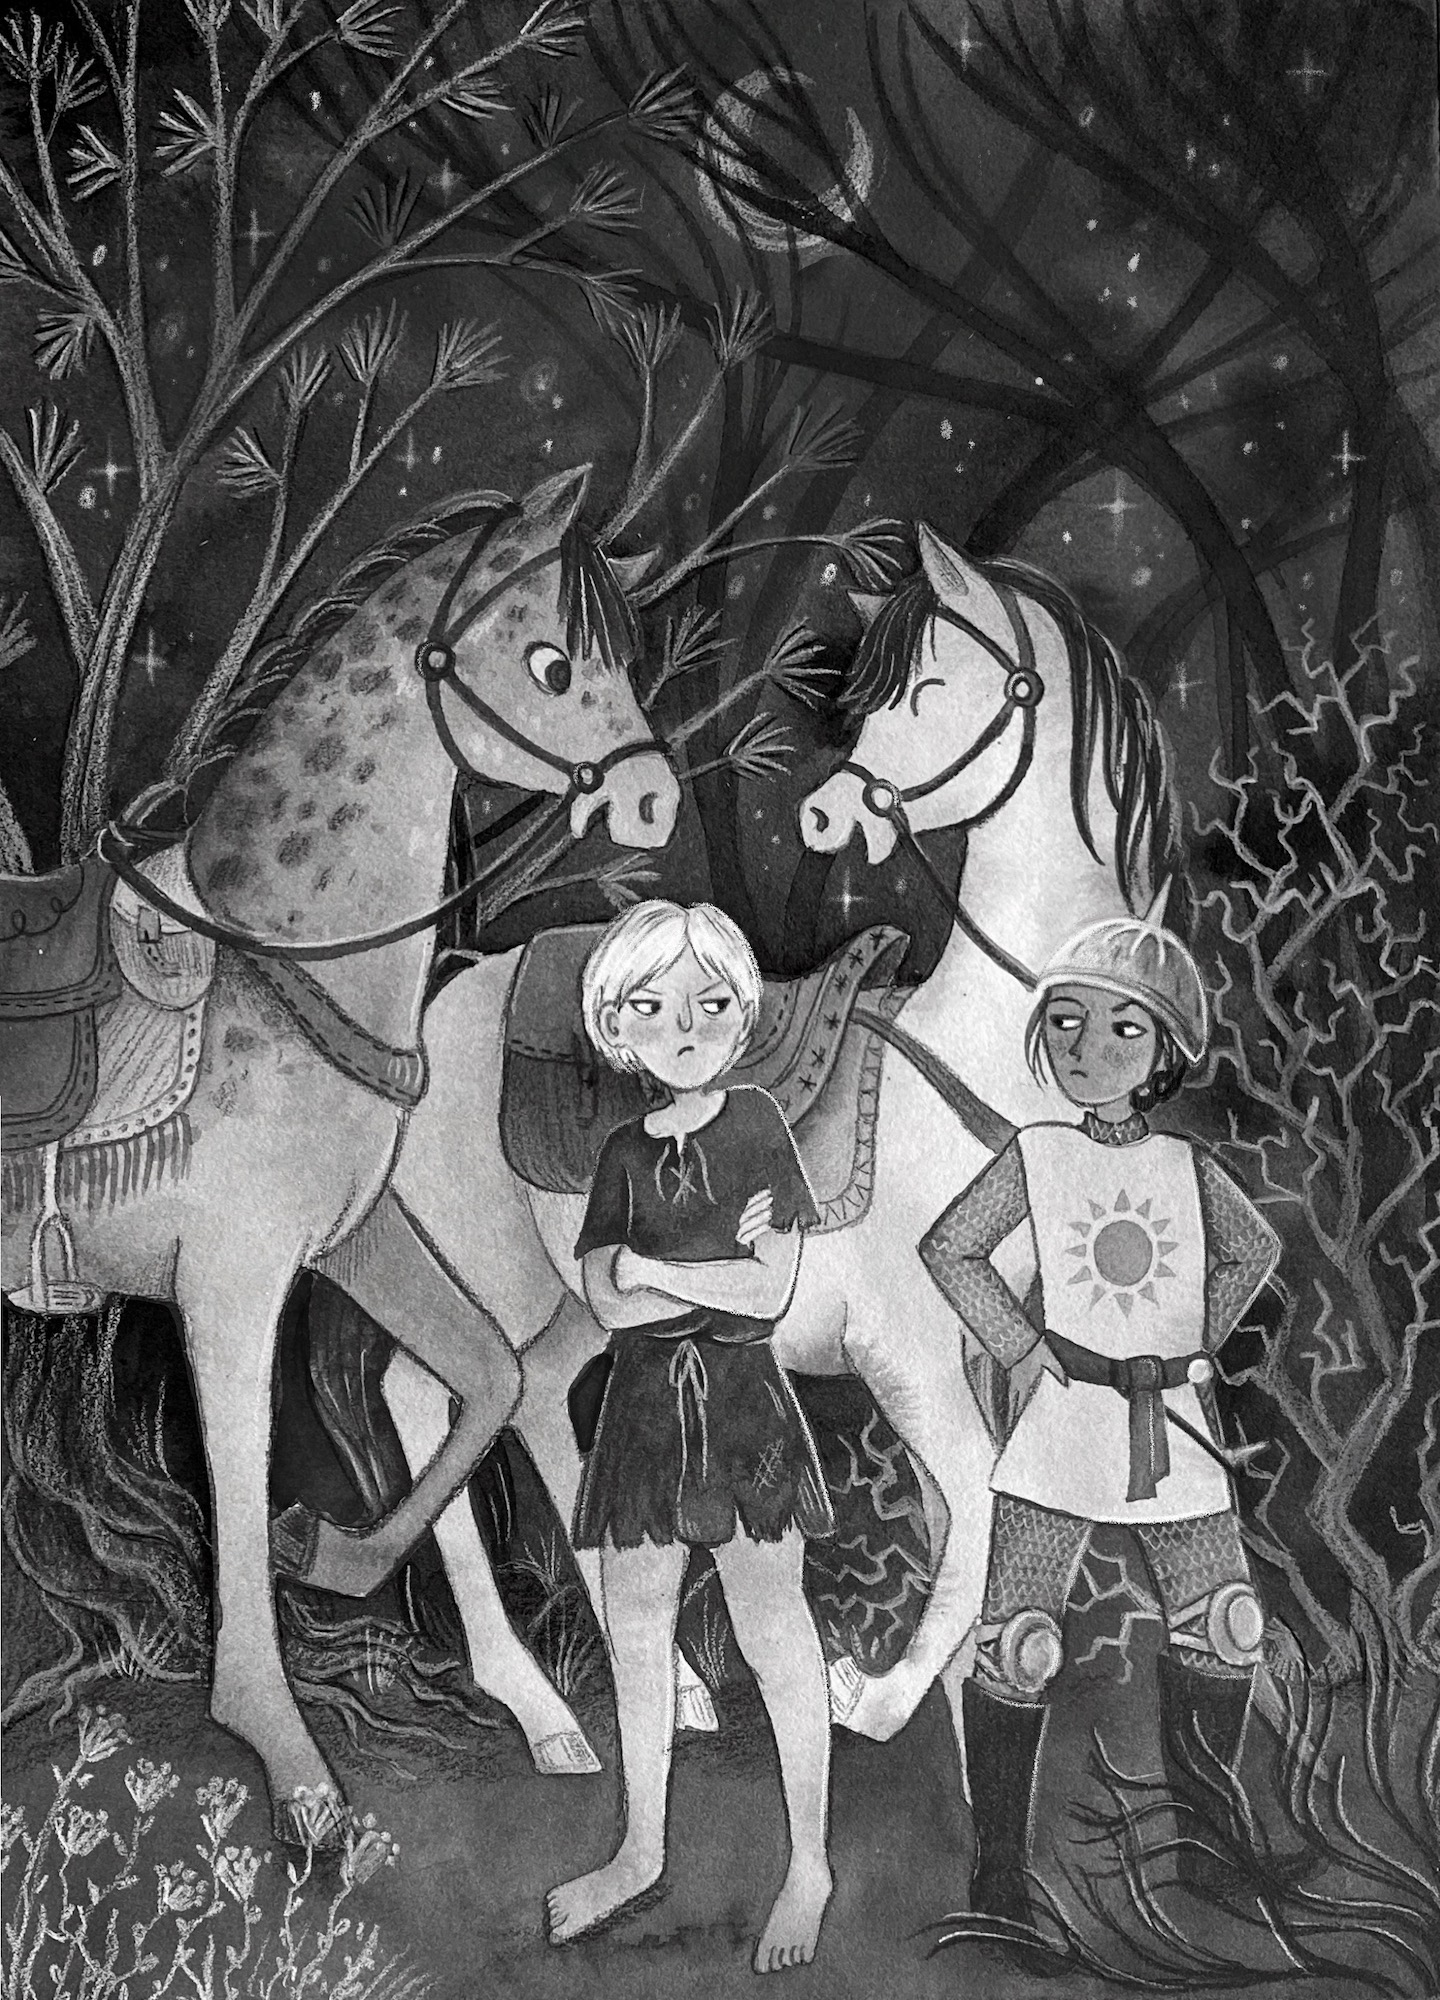 Black and white chapter book illustration from The Horse and his Boy from the Chronicles of Narnia series by C. S. Lewis. The image shows 2 horses, Bree and Hwin standing behind 2 children, Shasta and Arvis. The children look angry and annoyed with each other, as if they have just had an argument. The horses are laughing and talking together. In the background are silhouettes of trees and the night sky with stars and moon.